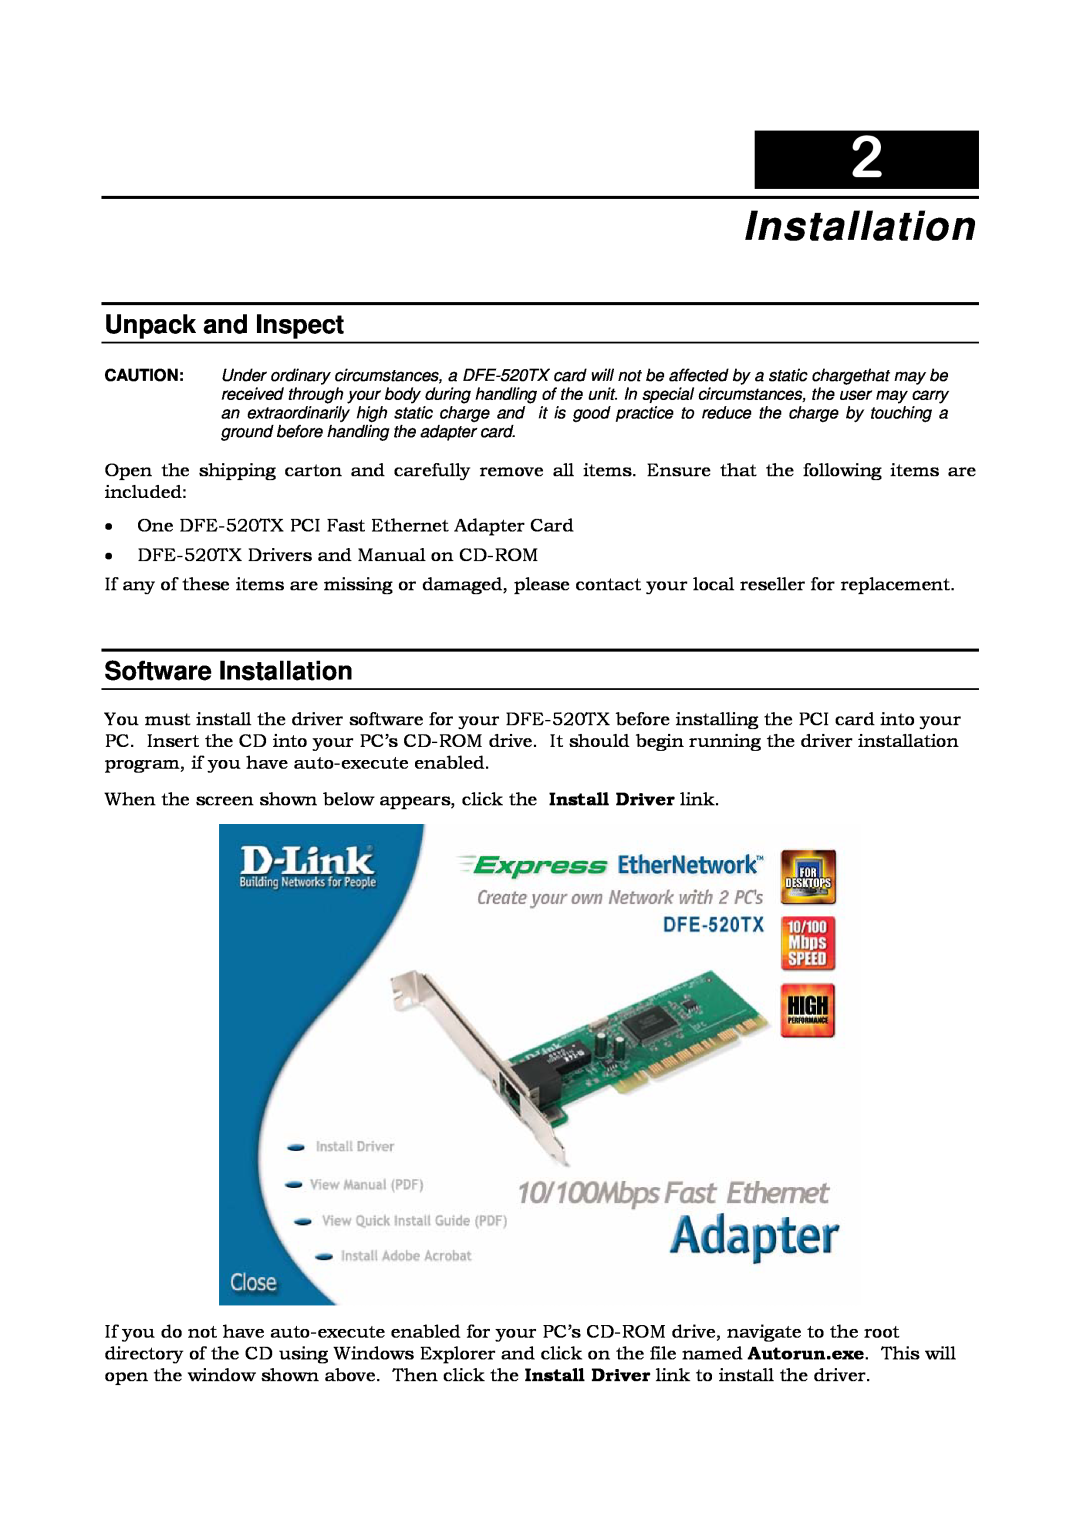 D-Link DFE-520TX manual Unpack and Inspect, Software Installation 